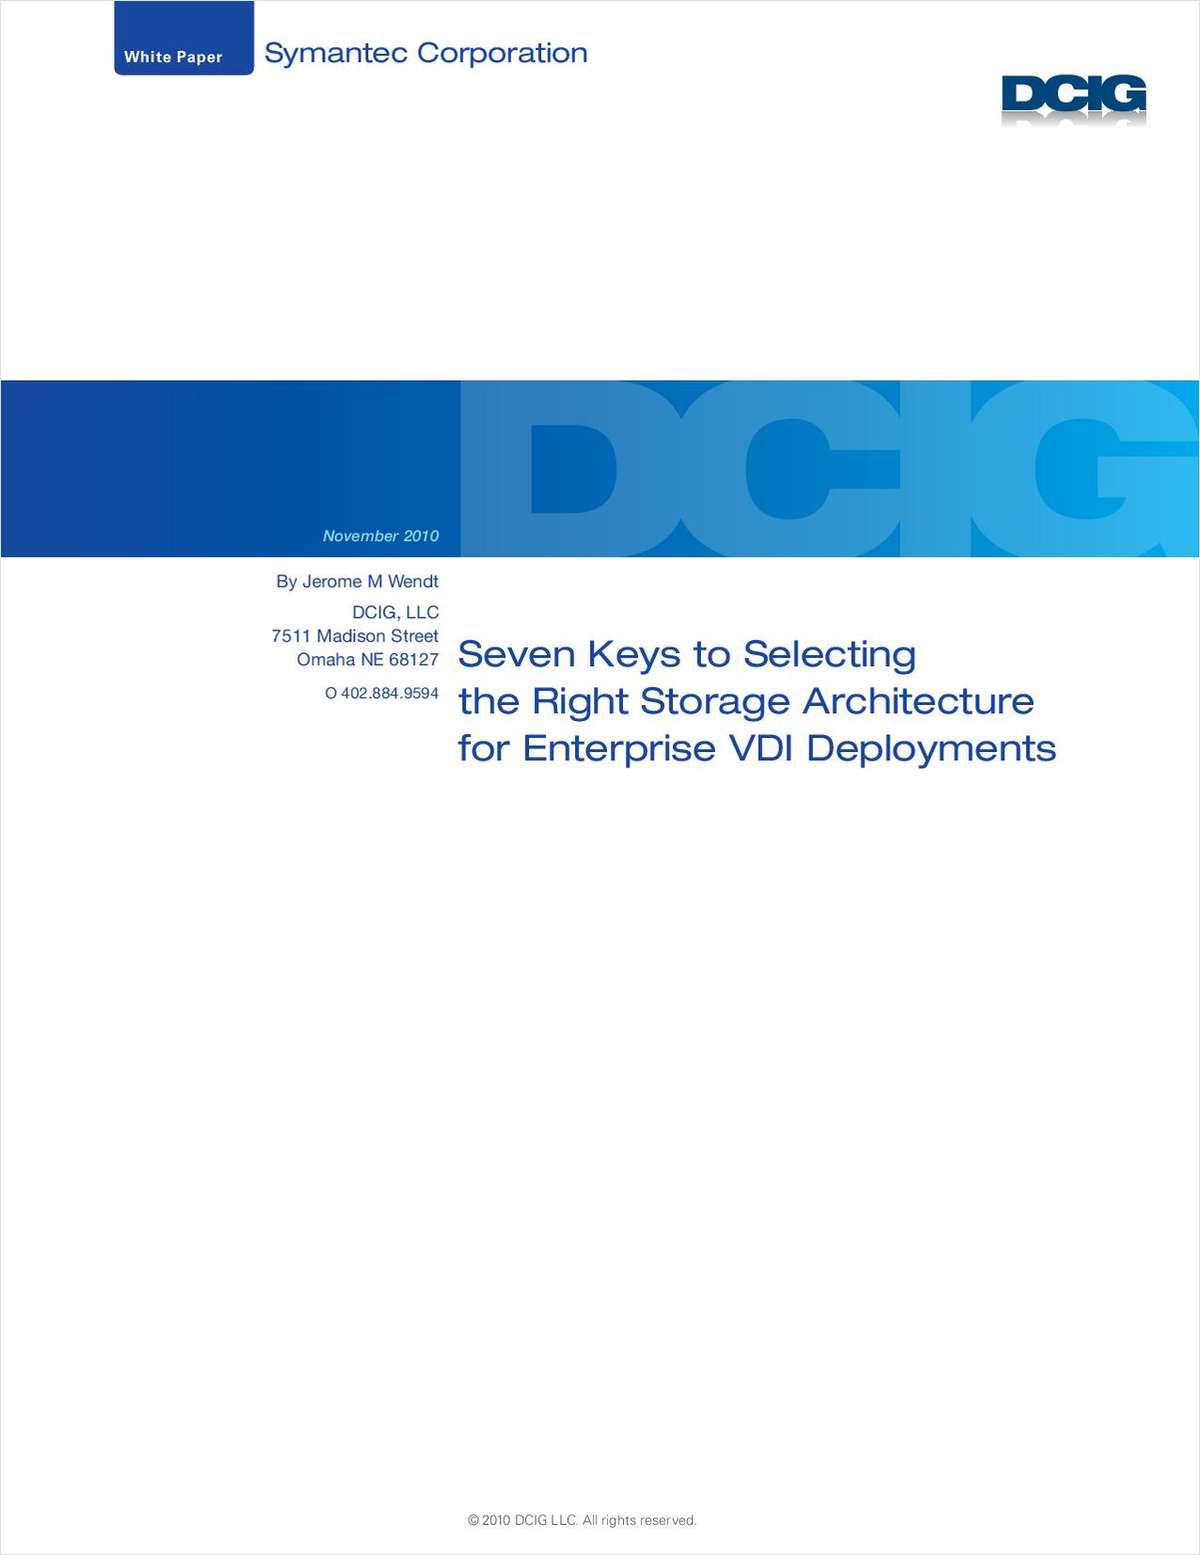 Seven Keys to Selecting the Right Storage Architecture for Enterprise VDI Deployments